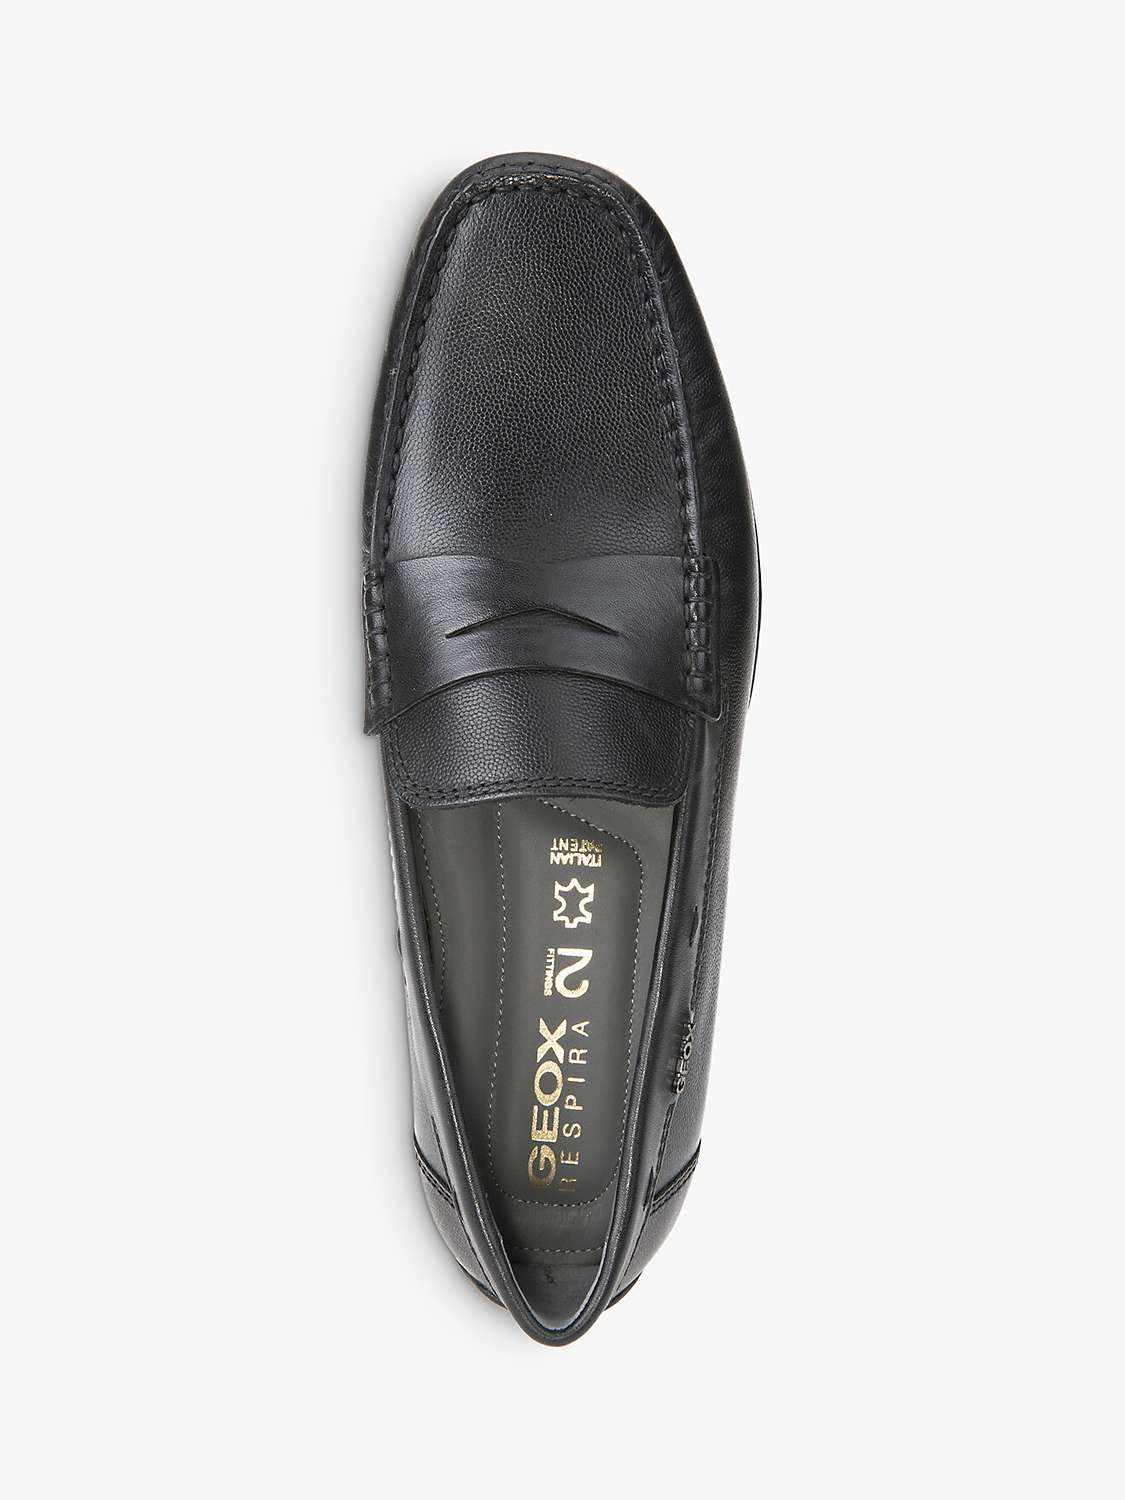 Geox Moner 2fit Man Leather Loafers, Black at John Lewis & Partners